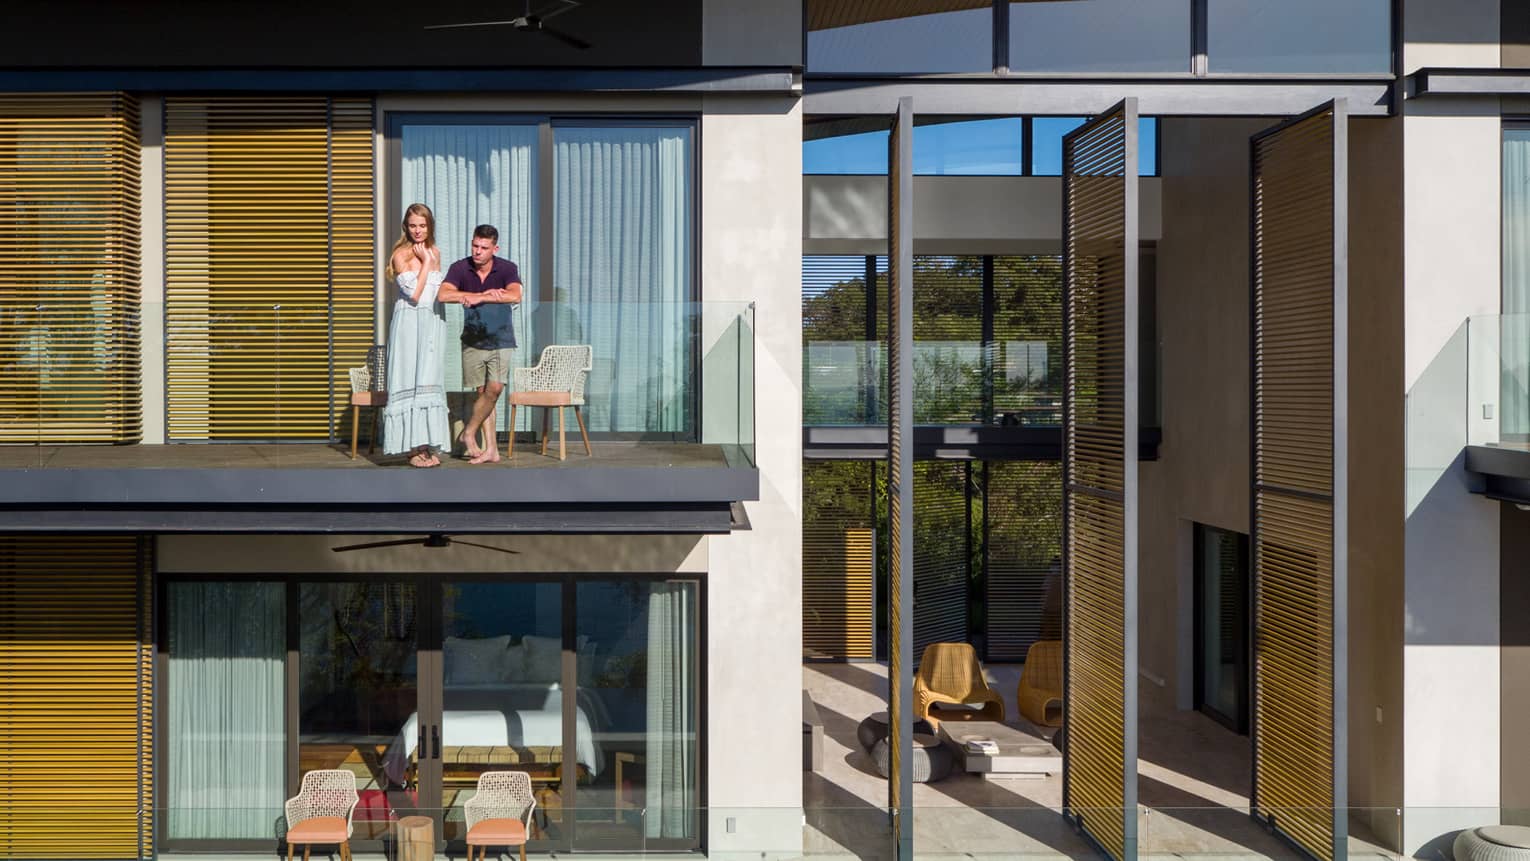 Man and woman stand on glass balcony of villa